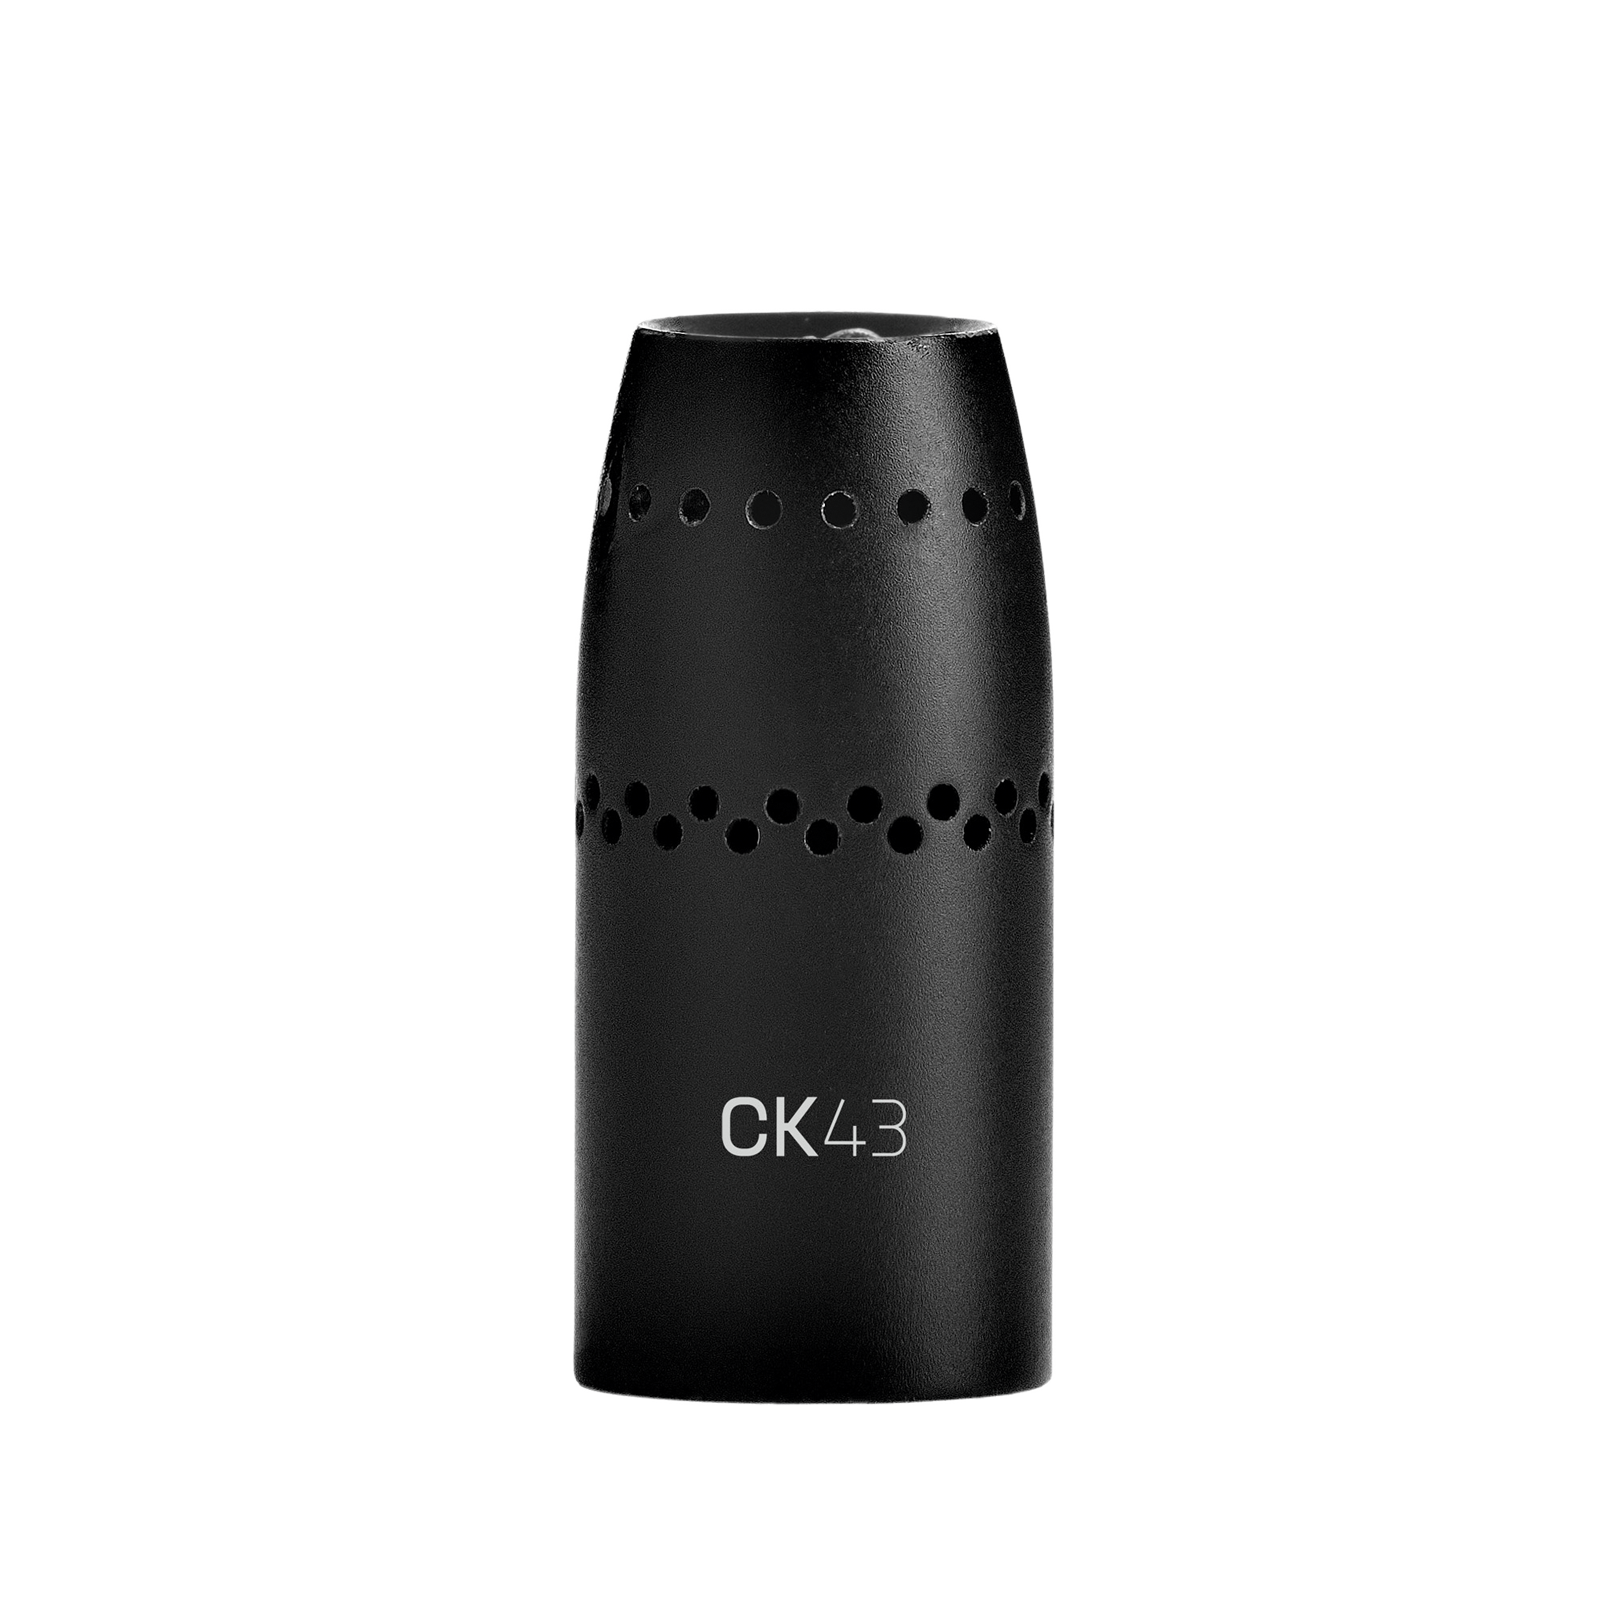 CK43 (discontinued) - Black - Reference supercardioid condenser microphone capsule - Hero